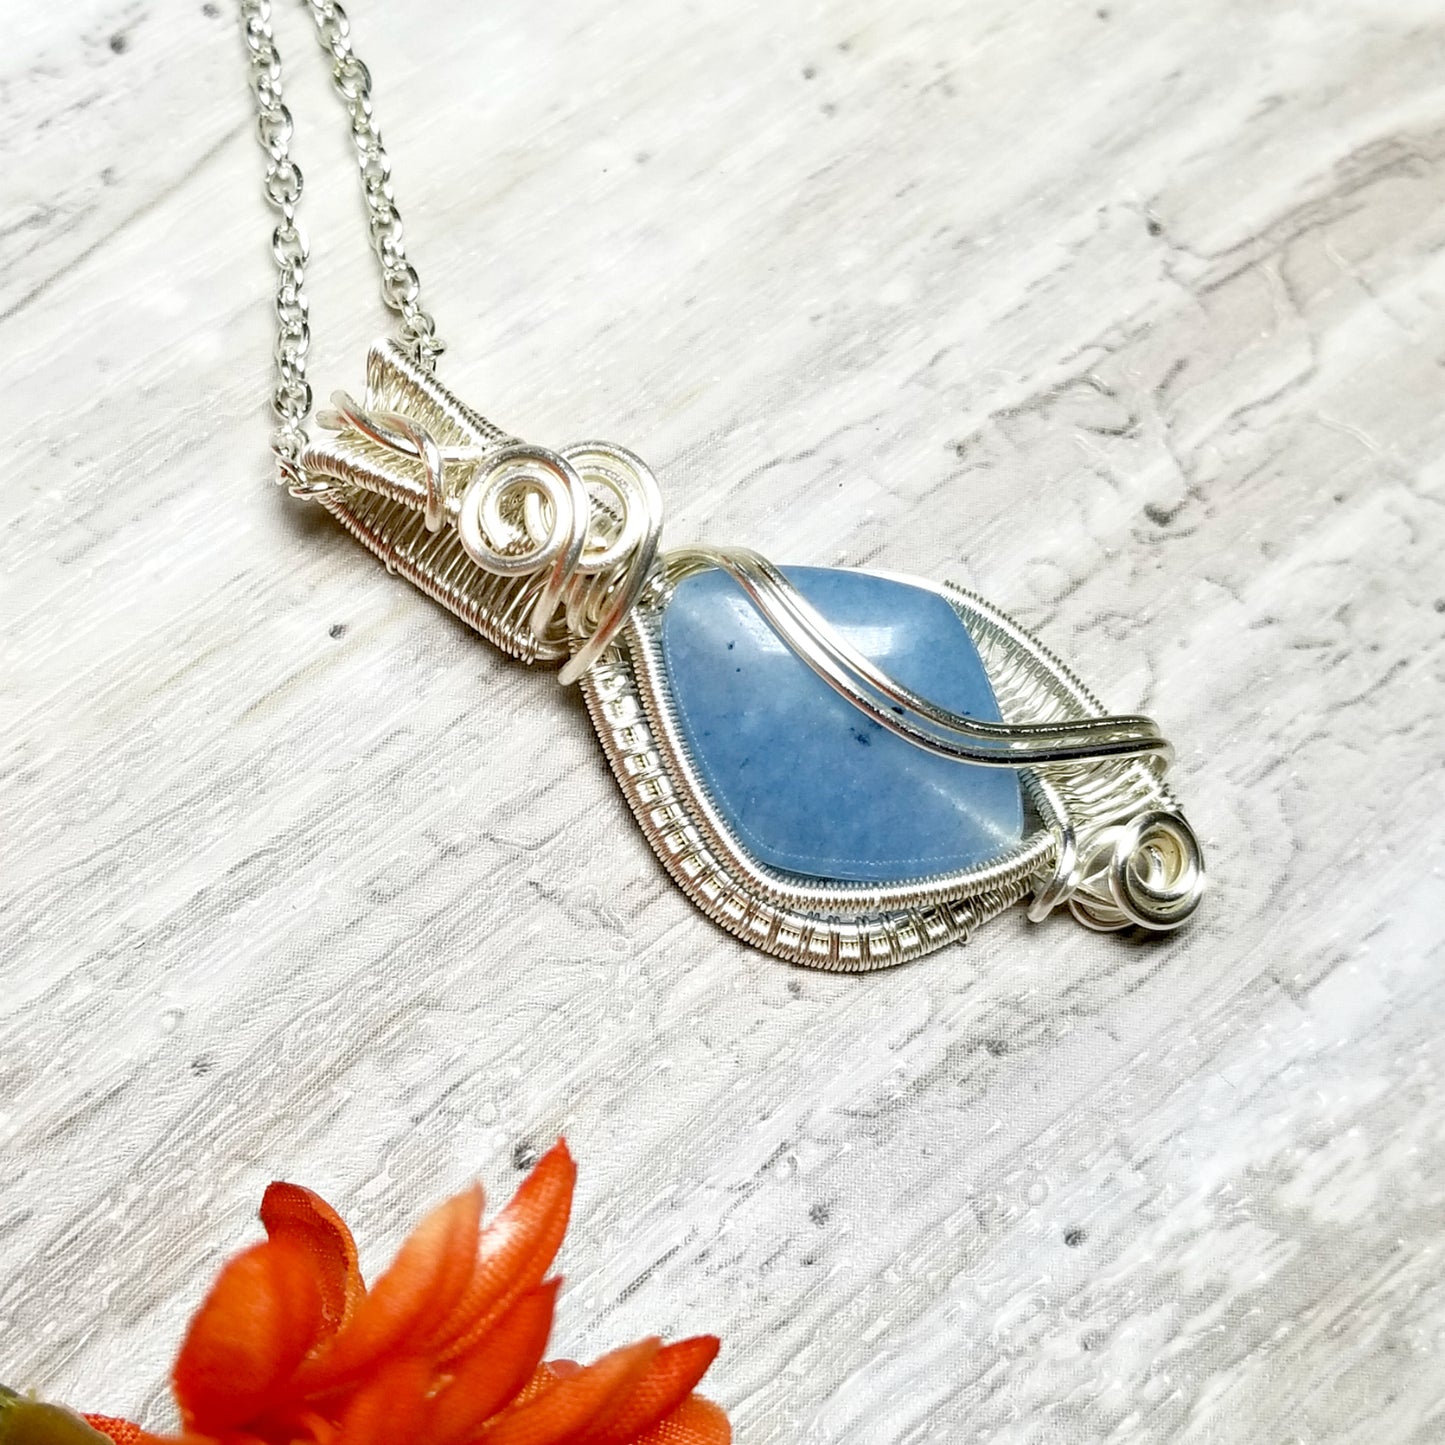 Blue Stone Necklace, Wire Weave Jewelry